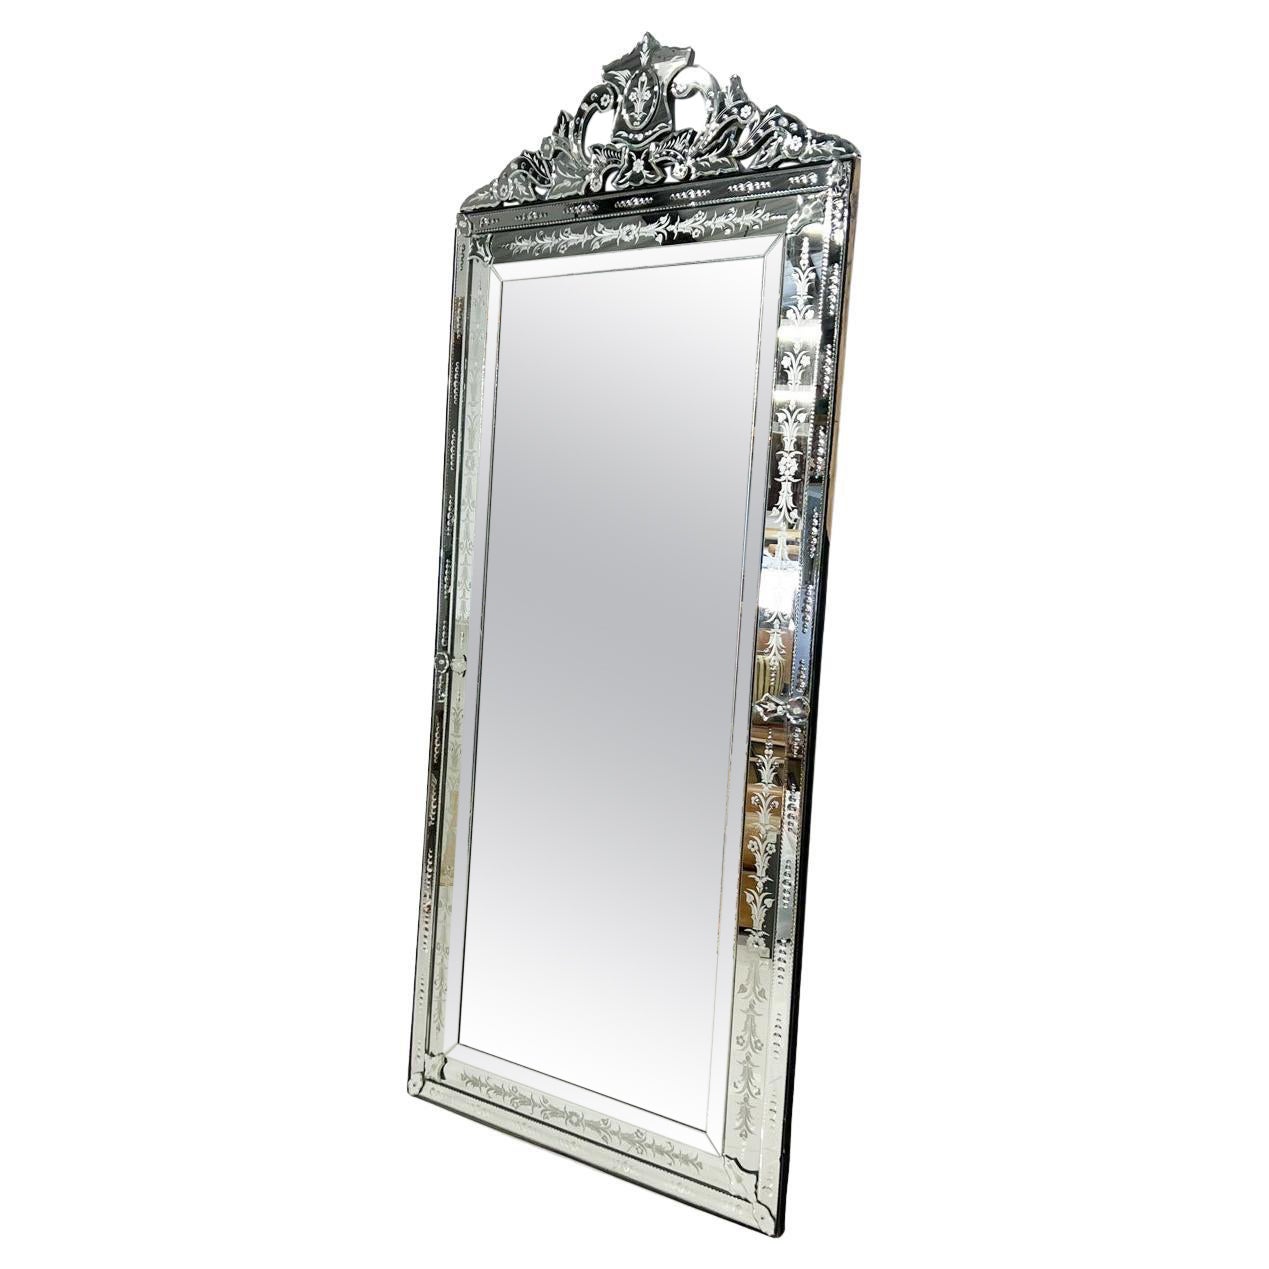 Handcrafted Venetian Full-Length Floor Mirror Extravagant Etched Crystal Glass